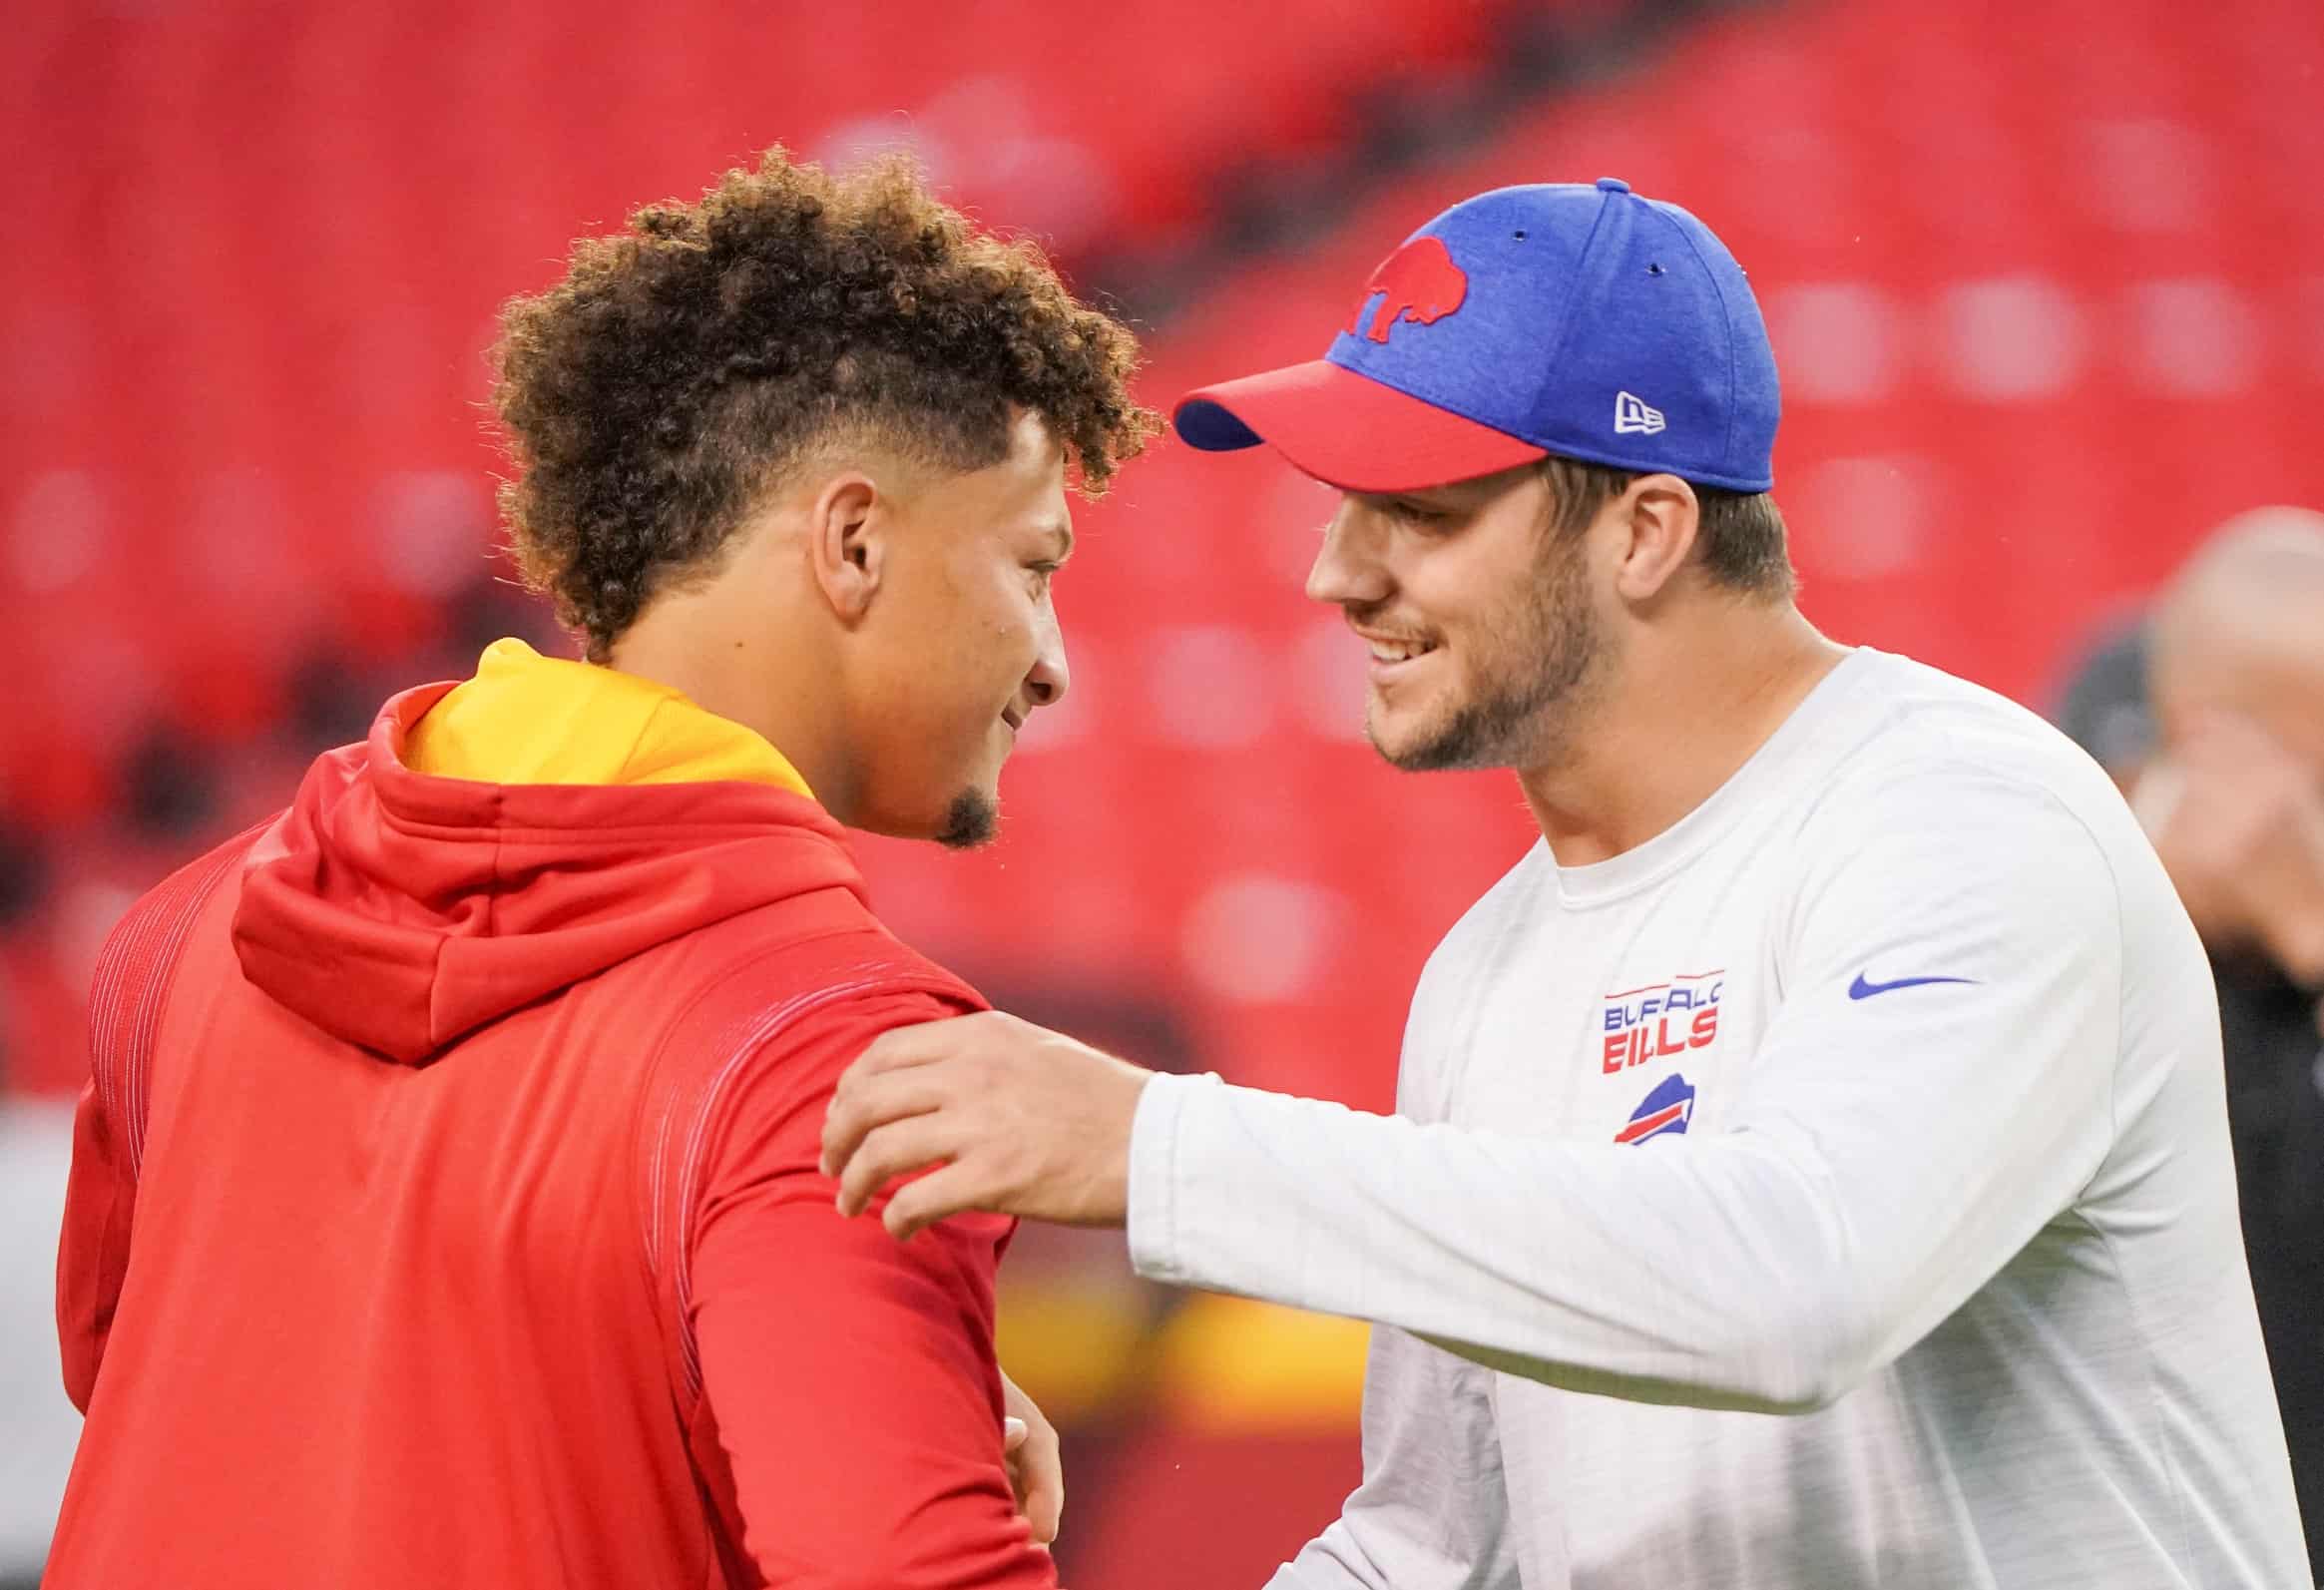 How Patrick Mahomes and Josh Allen are linked to the 2017 NFL Draft